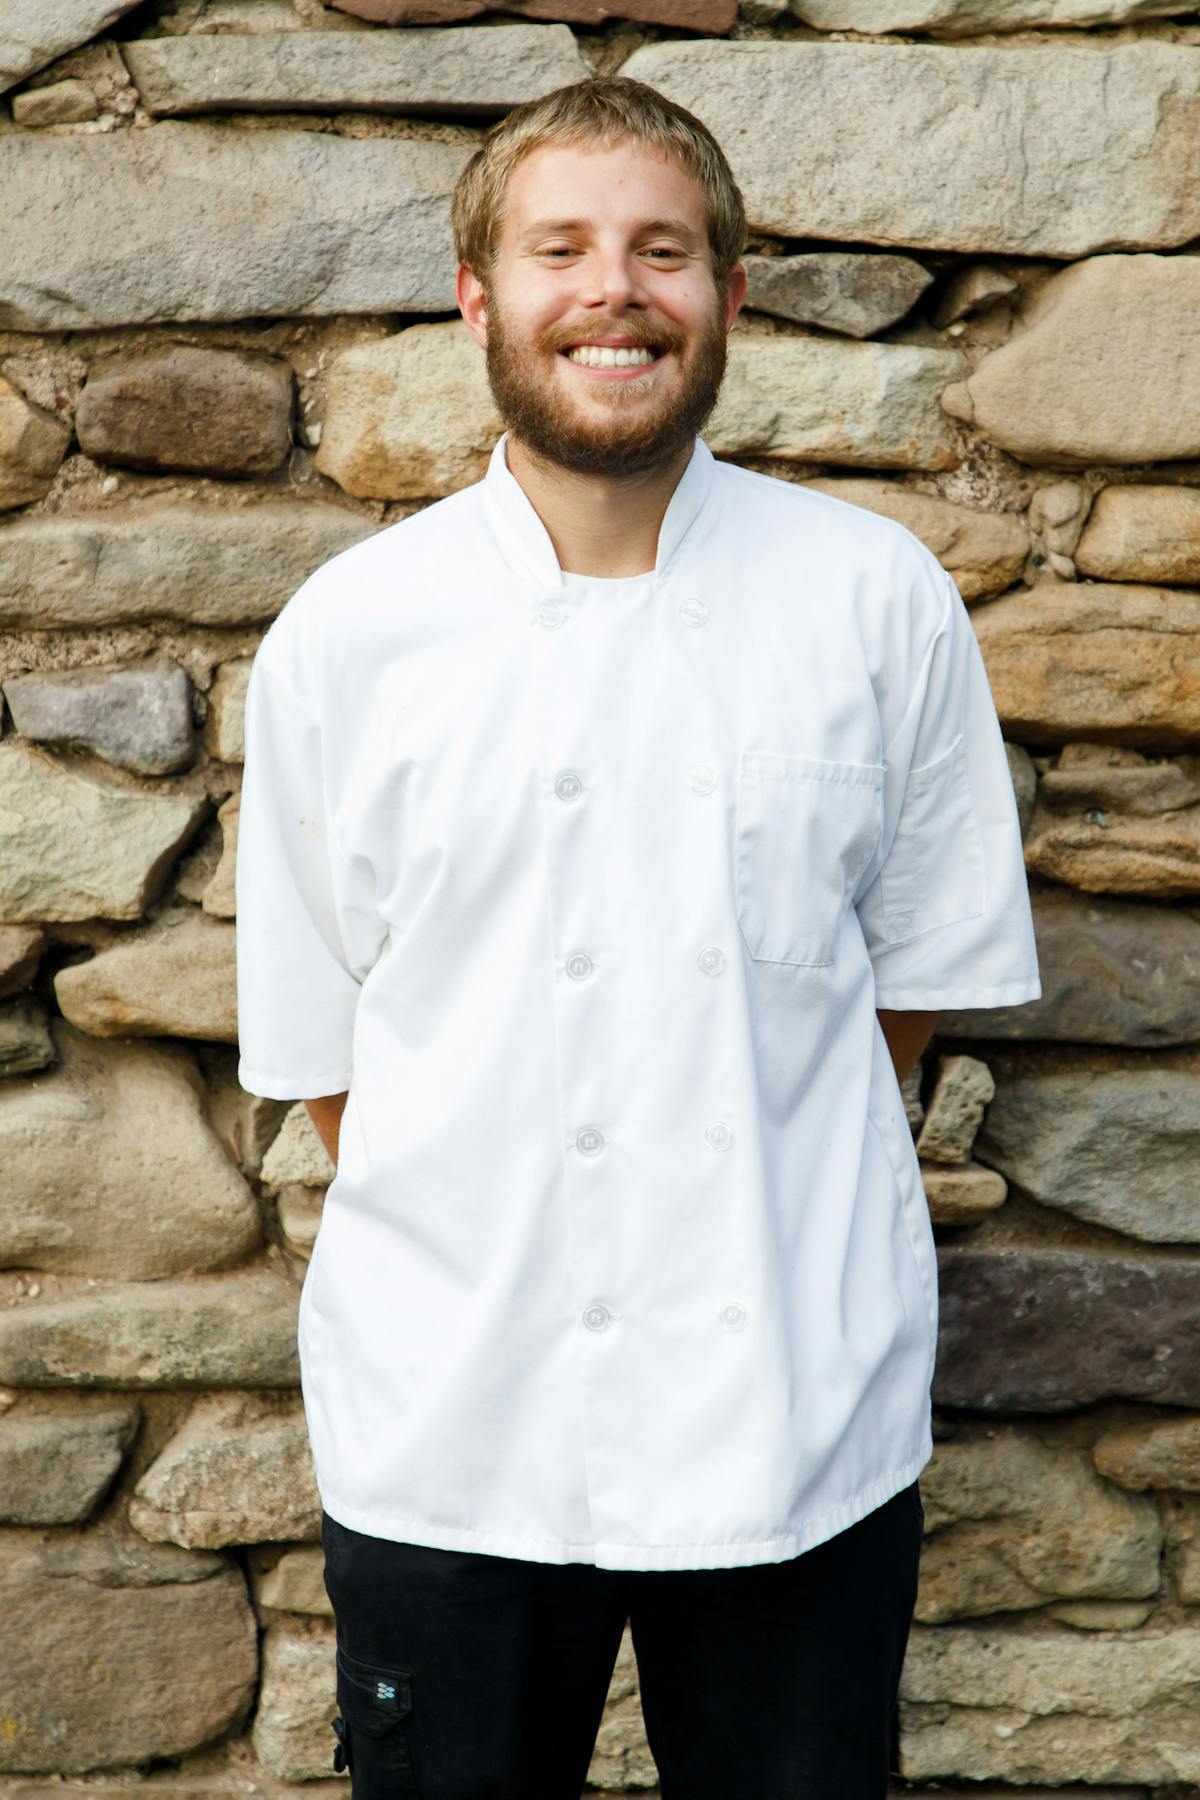 a man wearing a chef's jacket in front of a stone wall